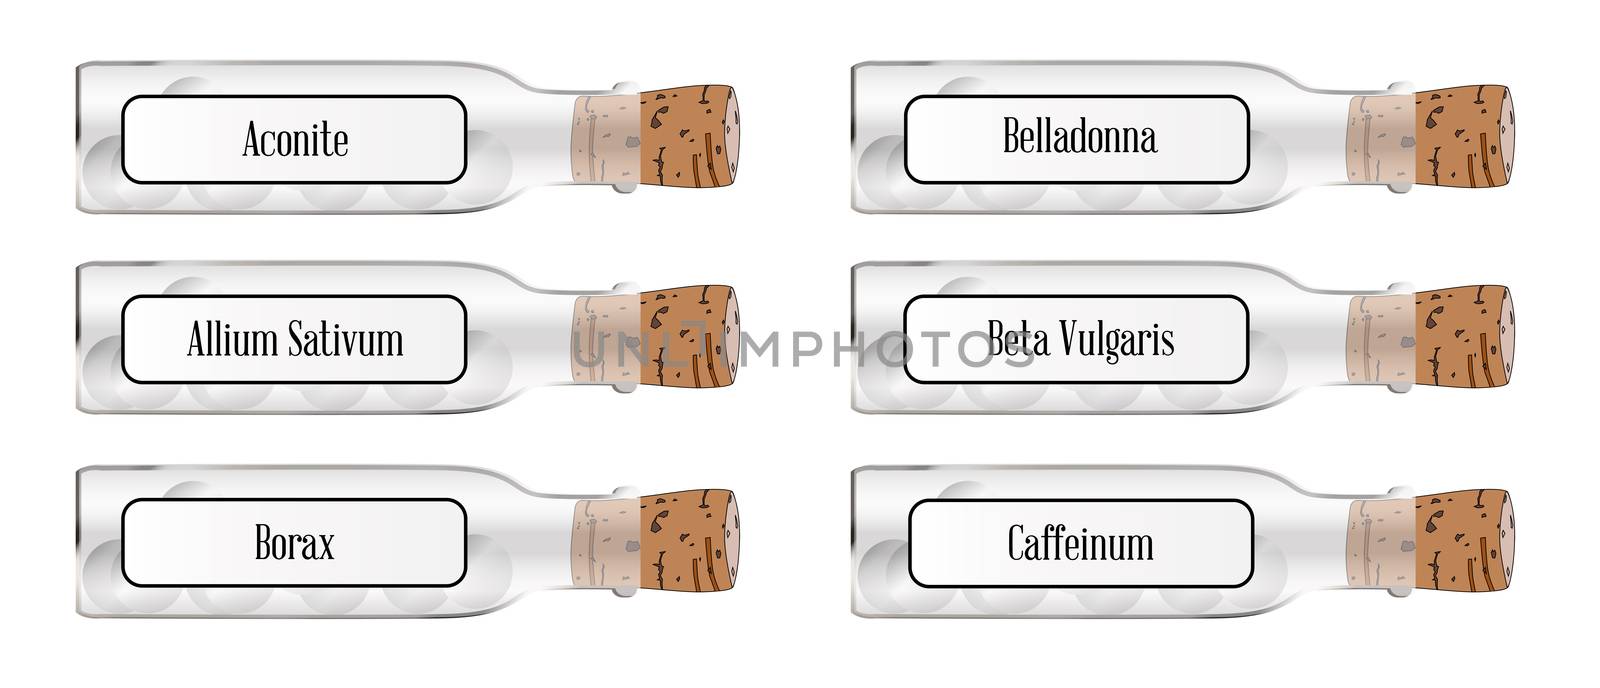 Homeopathic glass remedy bottles with labels and contents all over a white background